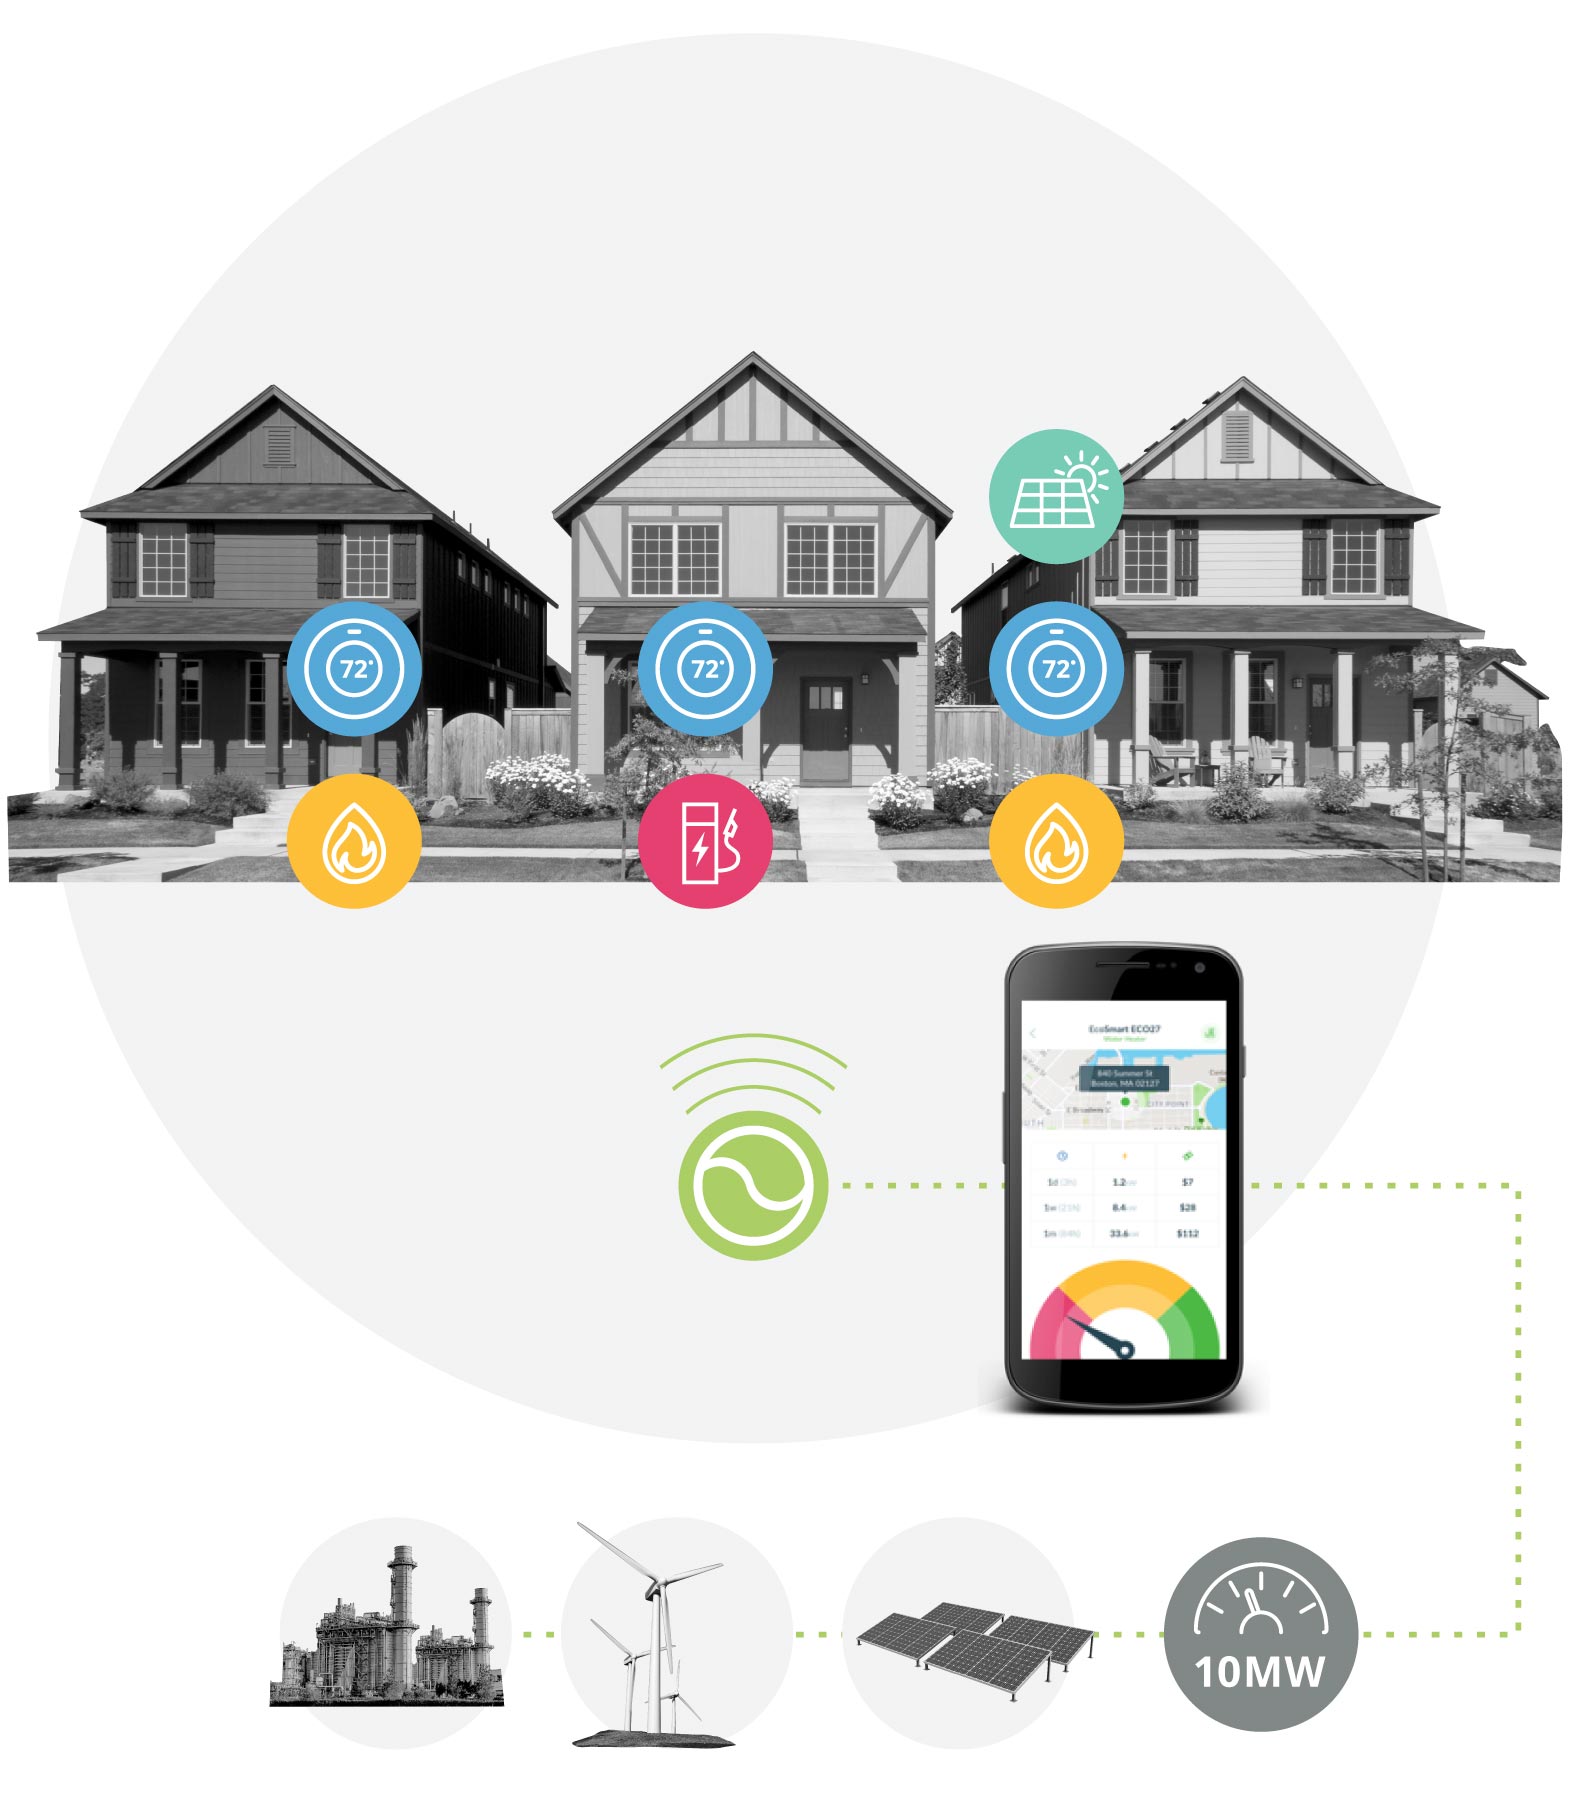 Black and white photo of three homes with icons for thermostats, solar panels, ev charging, and hot water heaters, controlled by wireless technology and an app.